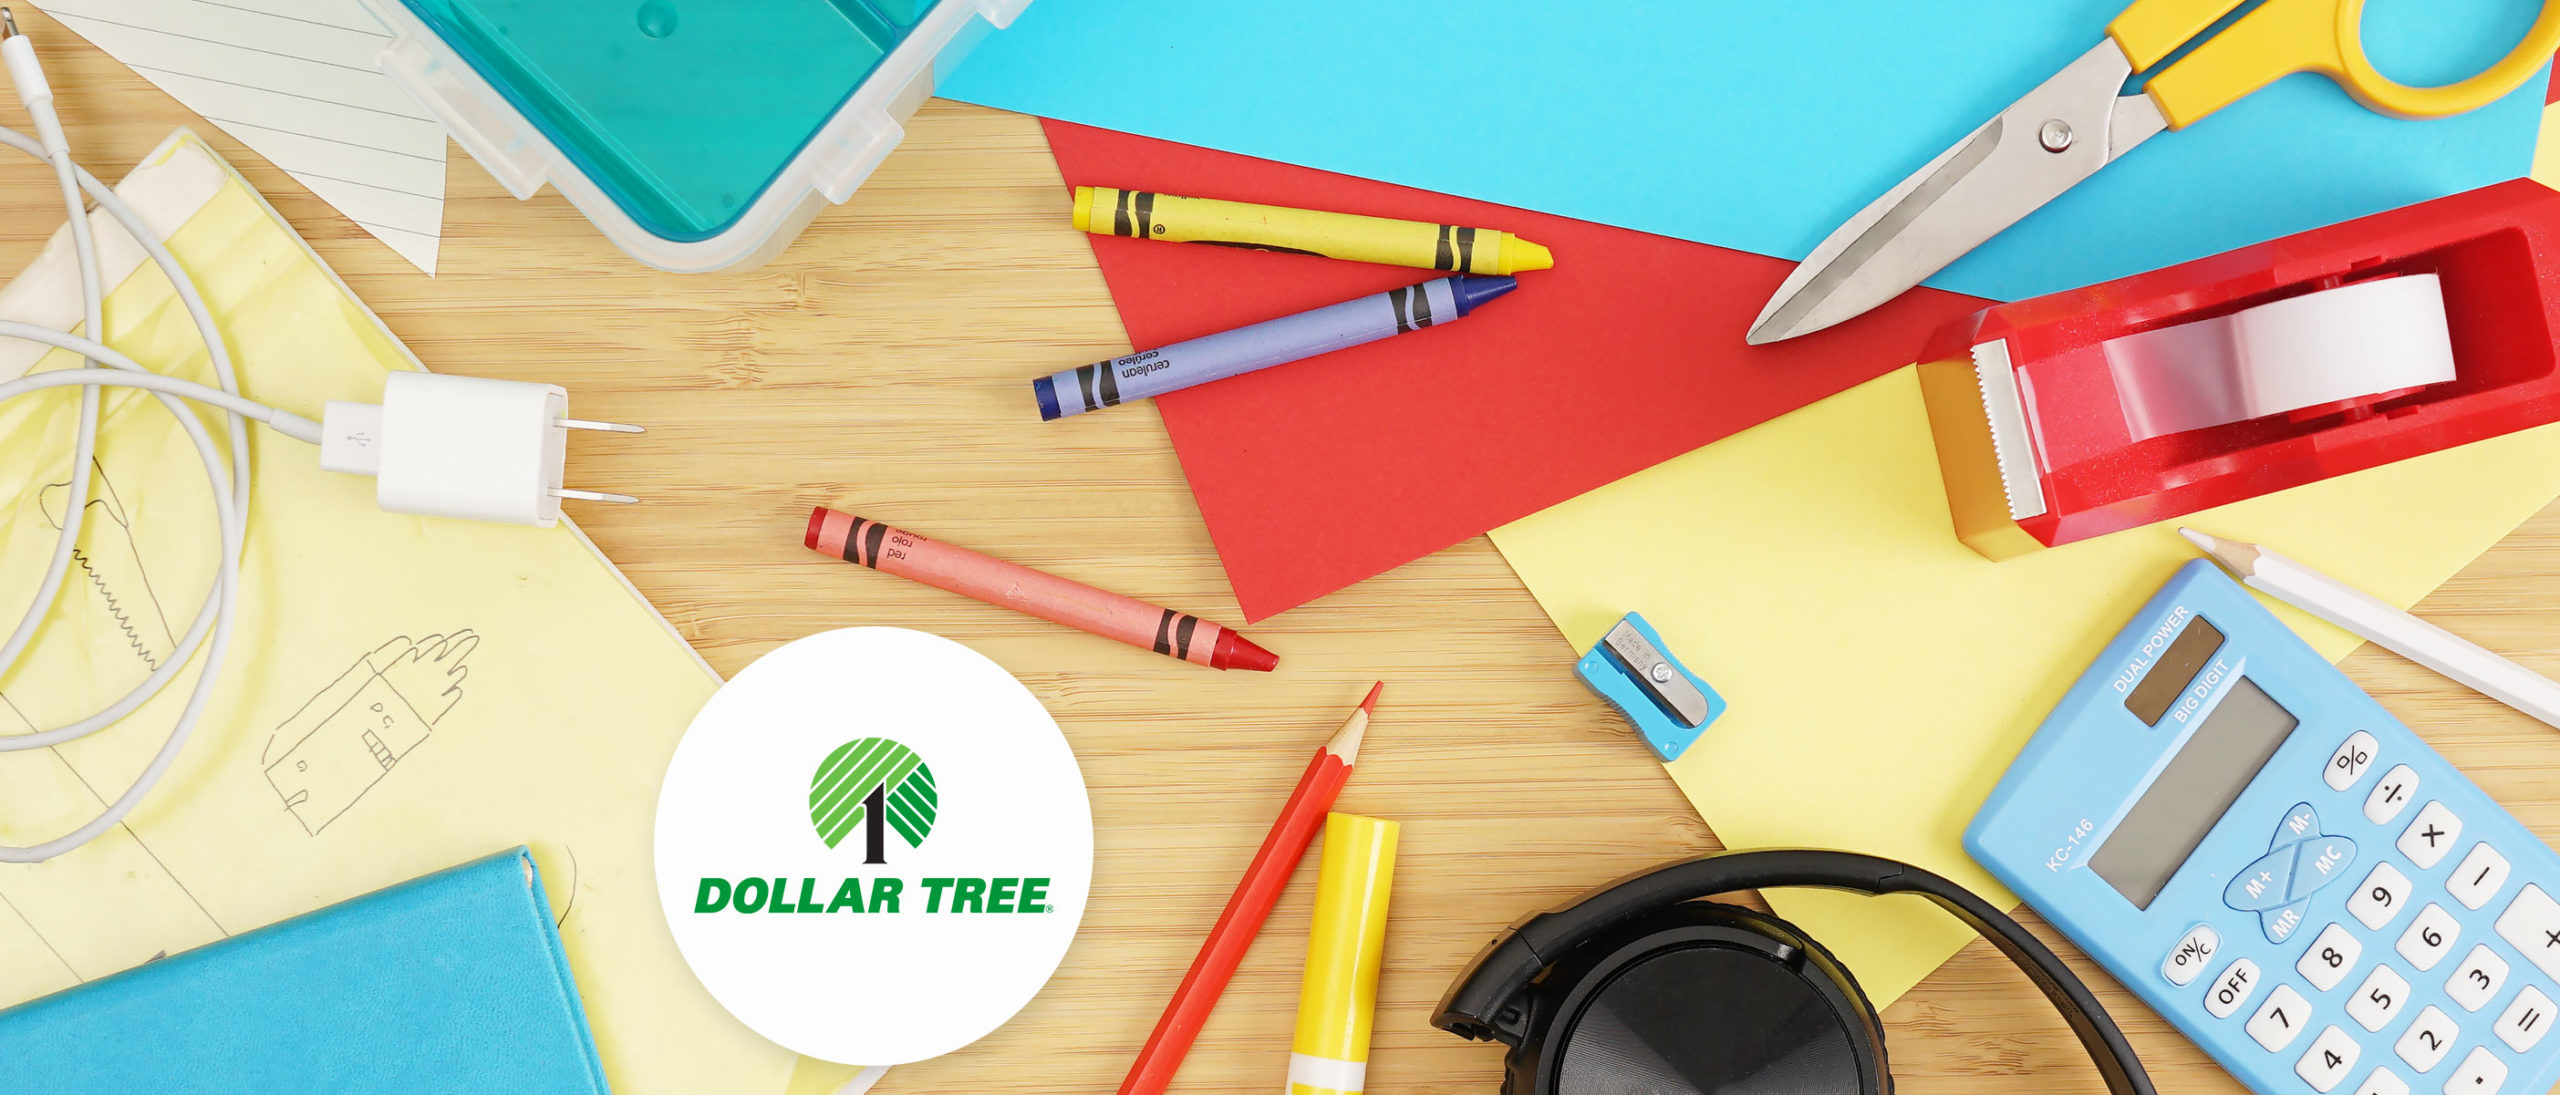 Flipp’s Top Five Dollar Tree Back-to-School Items for Only $1